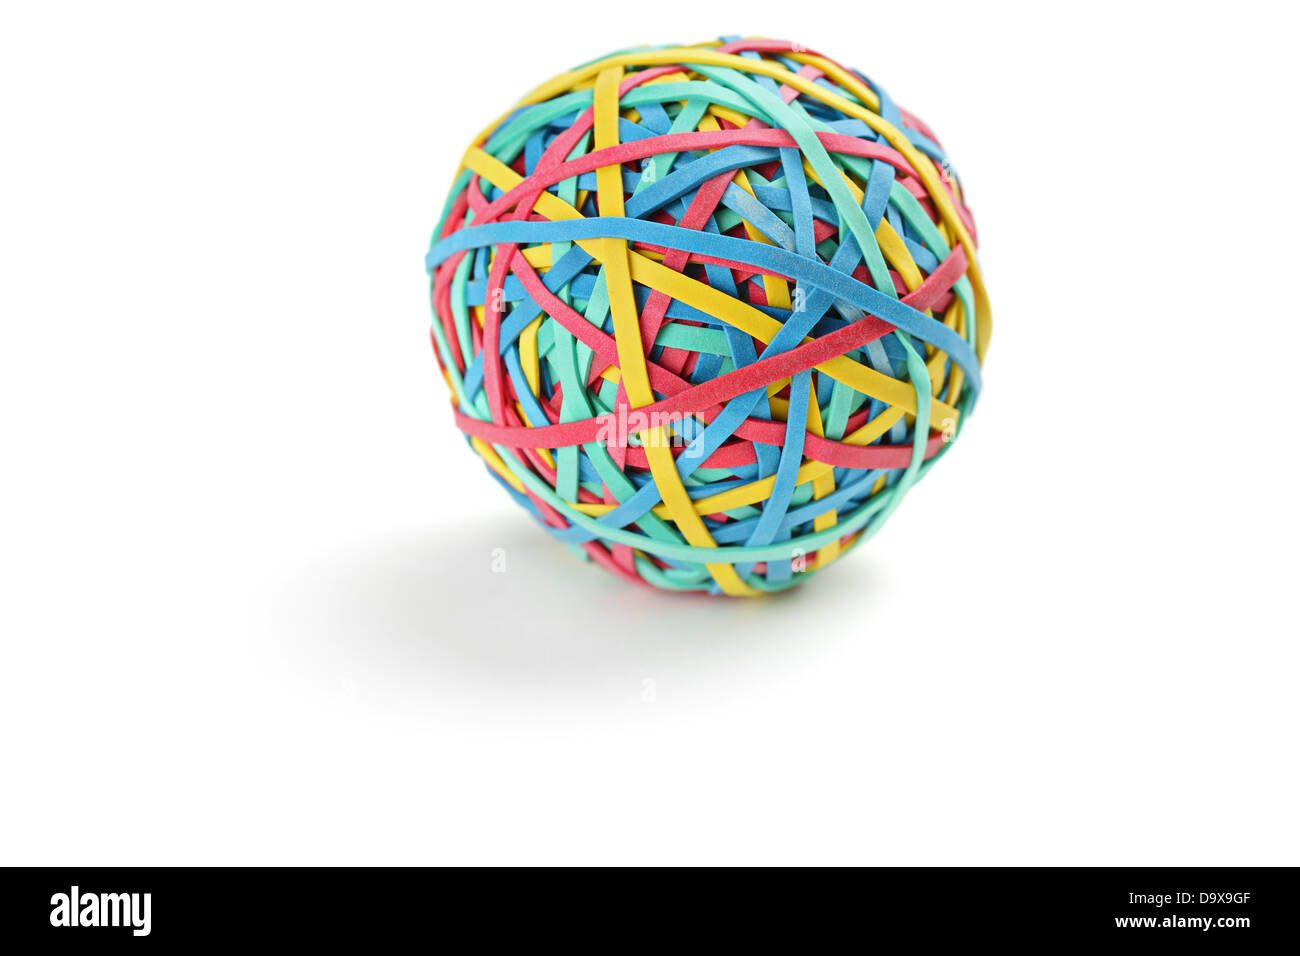 Studio shot of a colorful rubber band ball Stock Photo